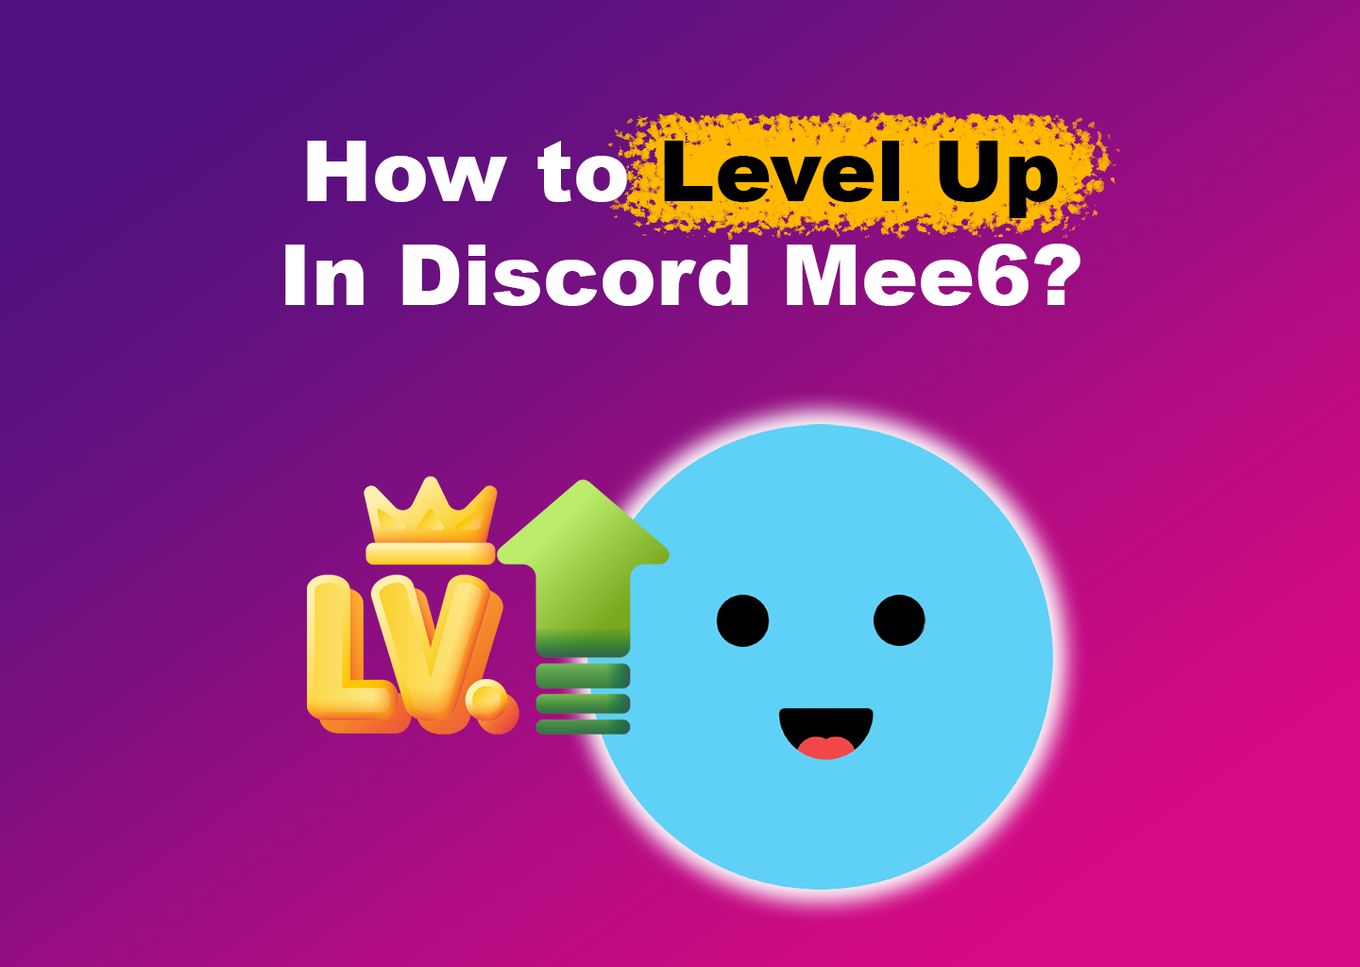 How to Level up in Discord Mee6